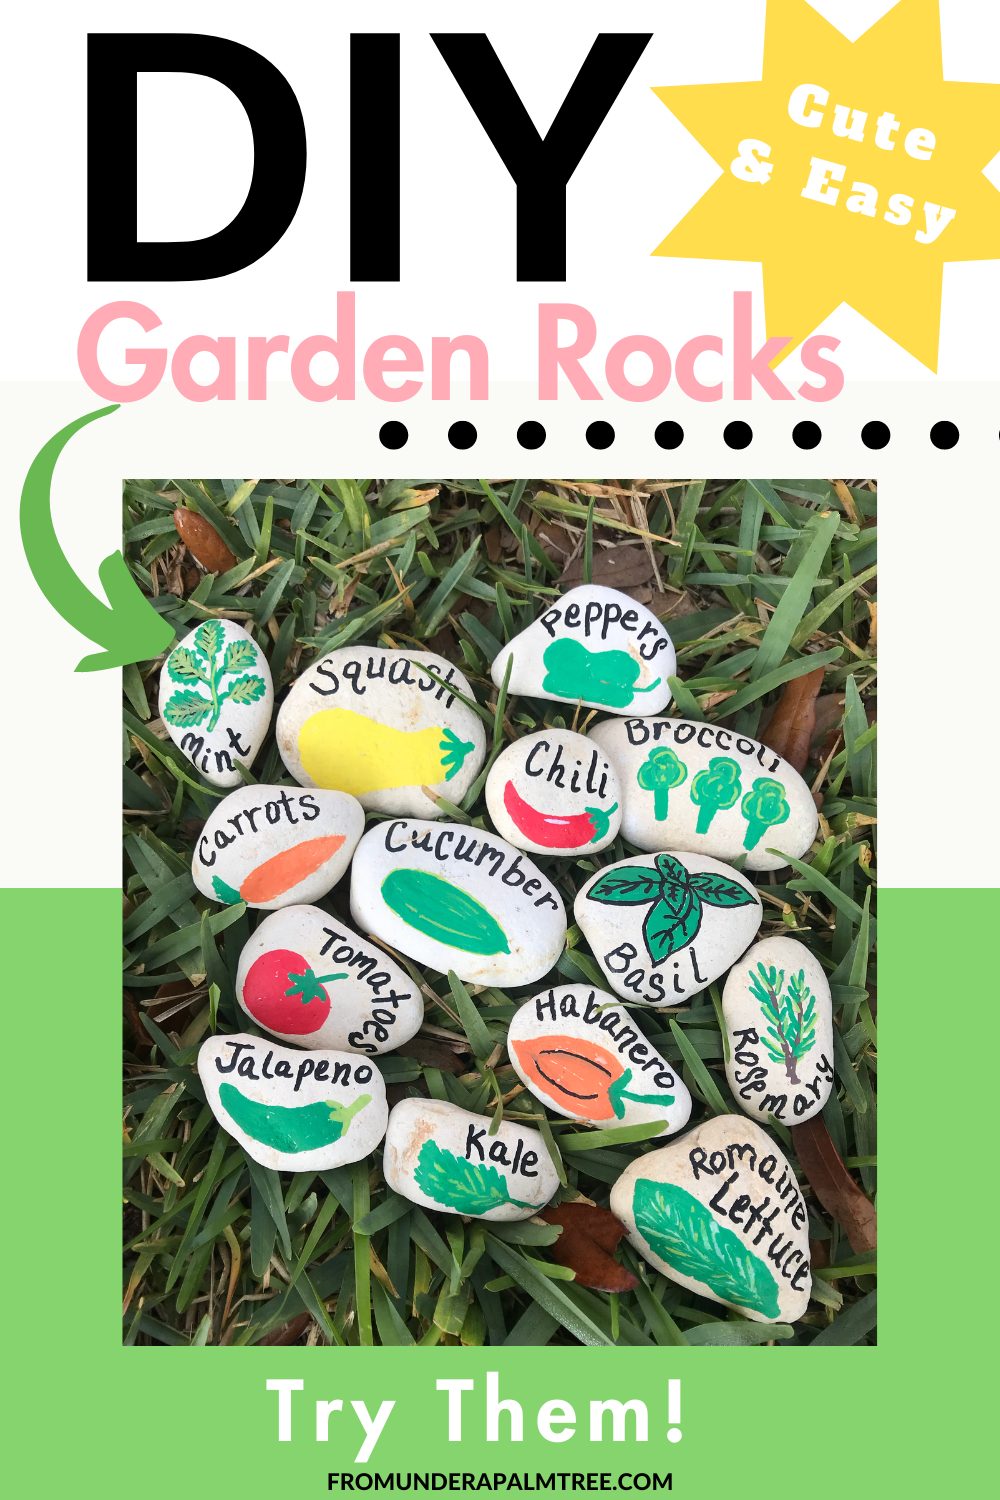 diy home | mom projects | gardener projects | gifts for a gardener | gifts for someone who loves gardening | DIY garden rock markers | painting rocks | rock painting ideas | mom crafts | DIY gifts | mother in law gifts | nana gifts | gardening gifts | veggie markers | herb markers | garden and veggie markers | markers for the garden | garden labels | diy home | mom projects | gardener projects | gifts for a gardener | gifts for someone who loves gardening | DIY garden rock markers | painting rocks | rock painting ideas | mom crafts | DIY gifts | mother in law gifts | nana gifts | gardening gifts | veggie markers | herb markers | garden and veggie markers | markers for the garden | garden labels | garden stones | garden herb stones | garden rocks | DIY garden rocks |